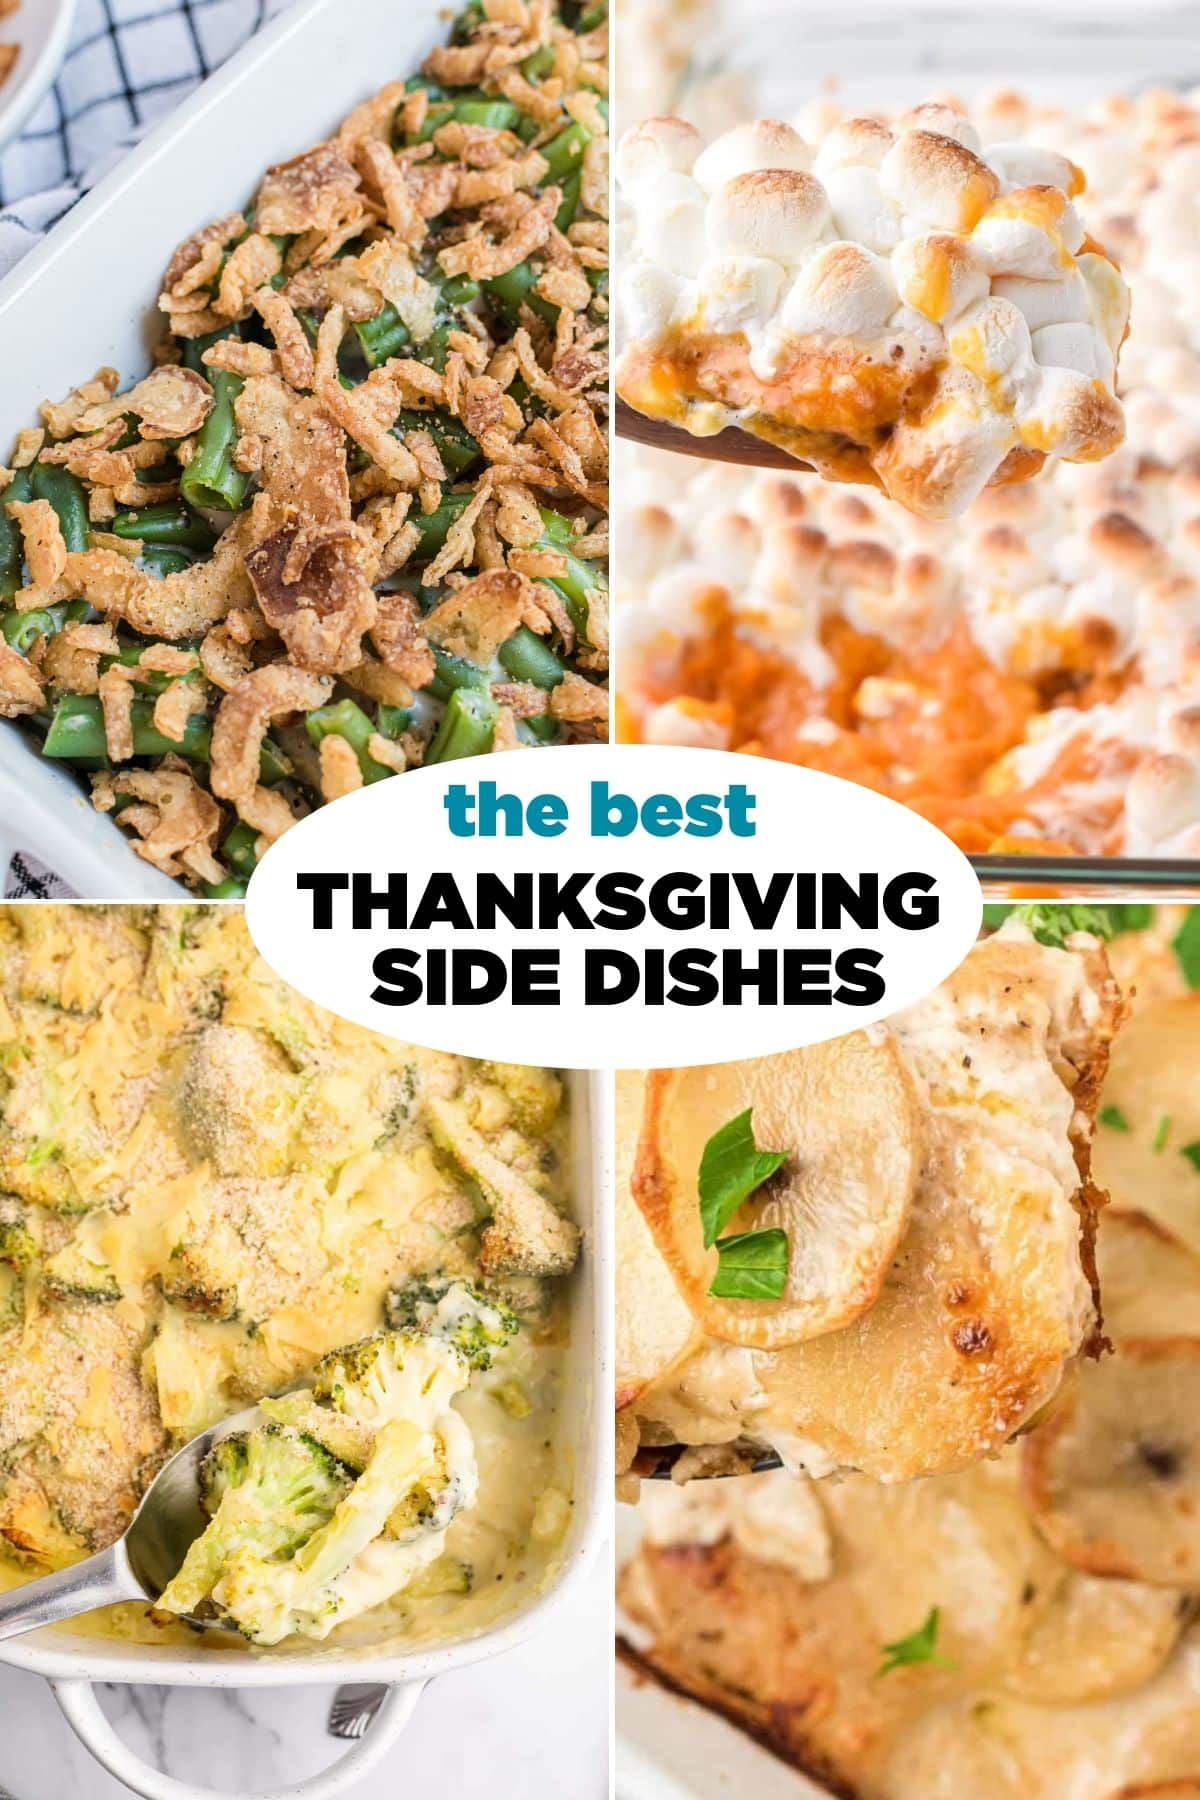 The ultimate Thanksgiving side dishes.